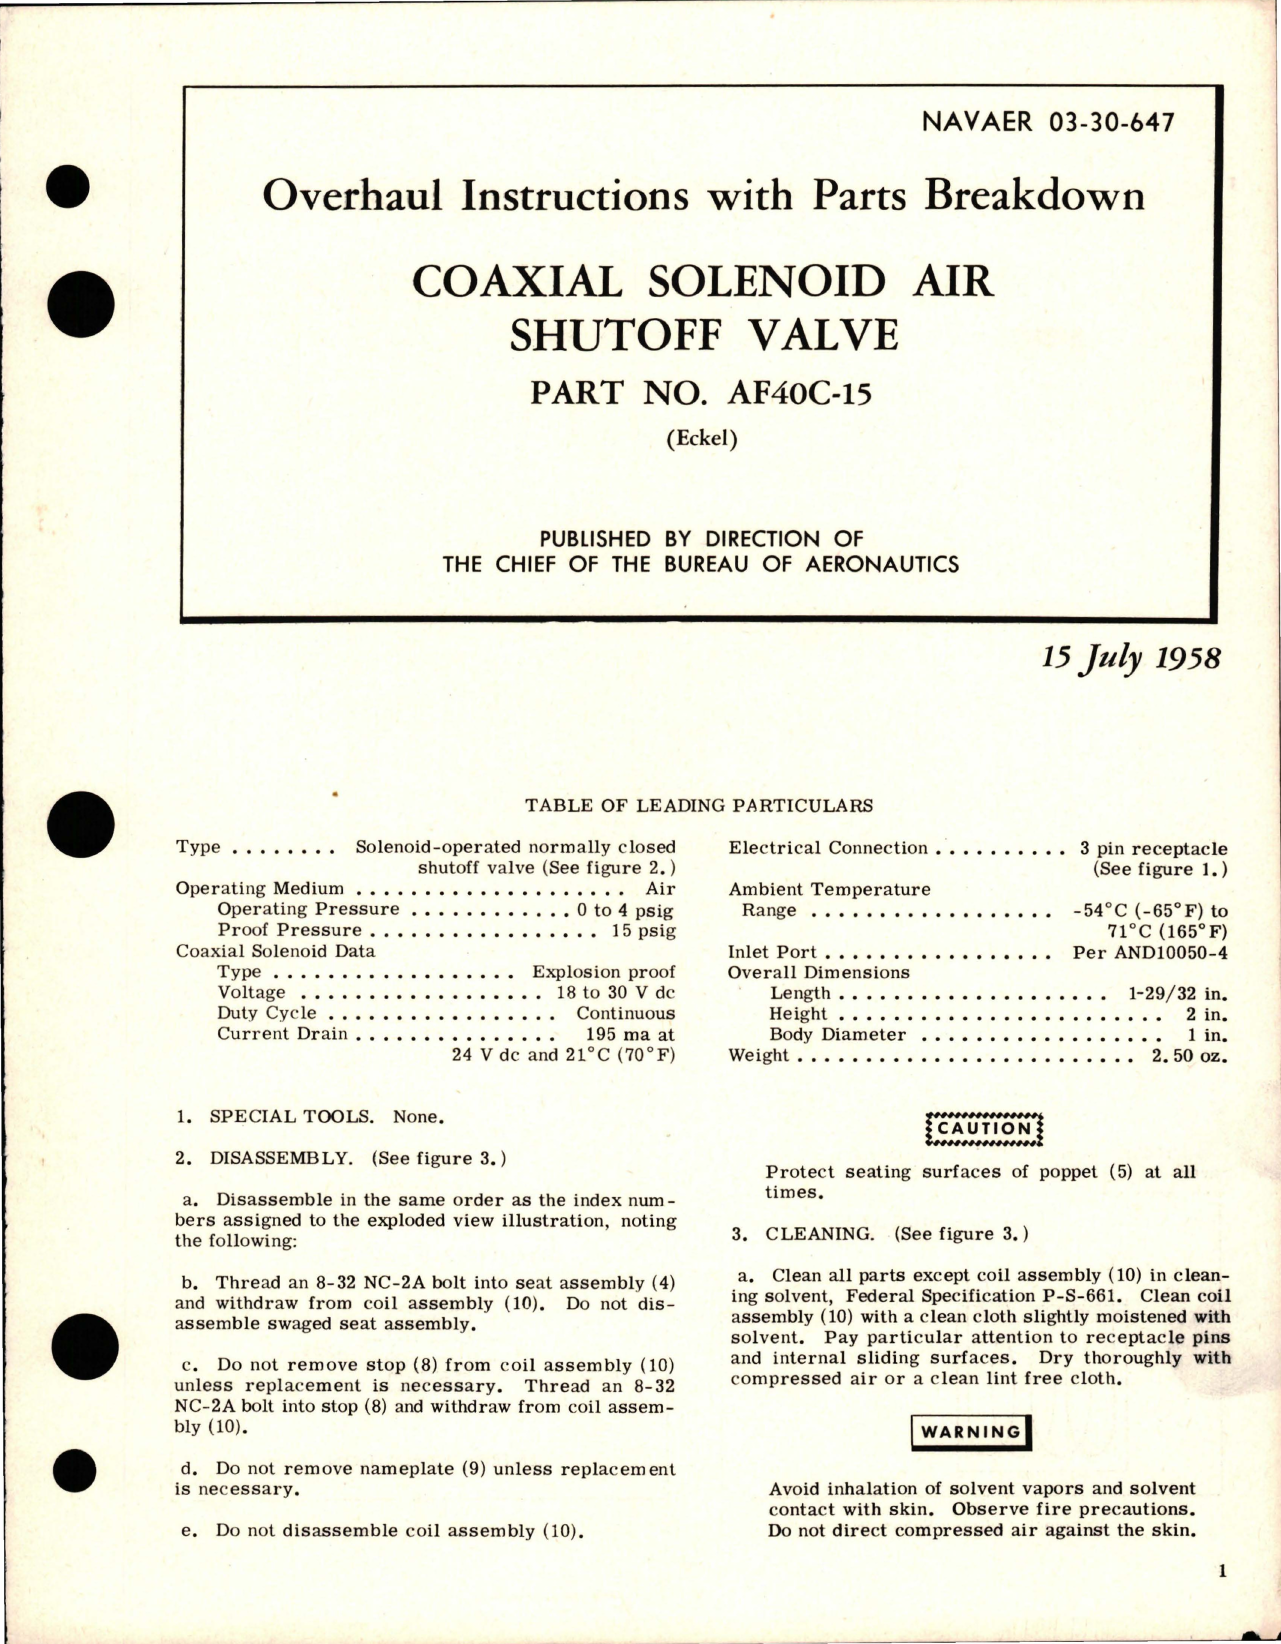 Sample page 1 from AirCorps Library document: Overhaul Instructions with Parts Breakdown for Coaxial Solenoid Air Shutoff Valve - Part AF40C-15